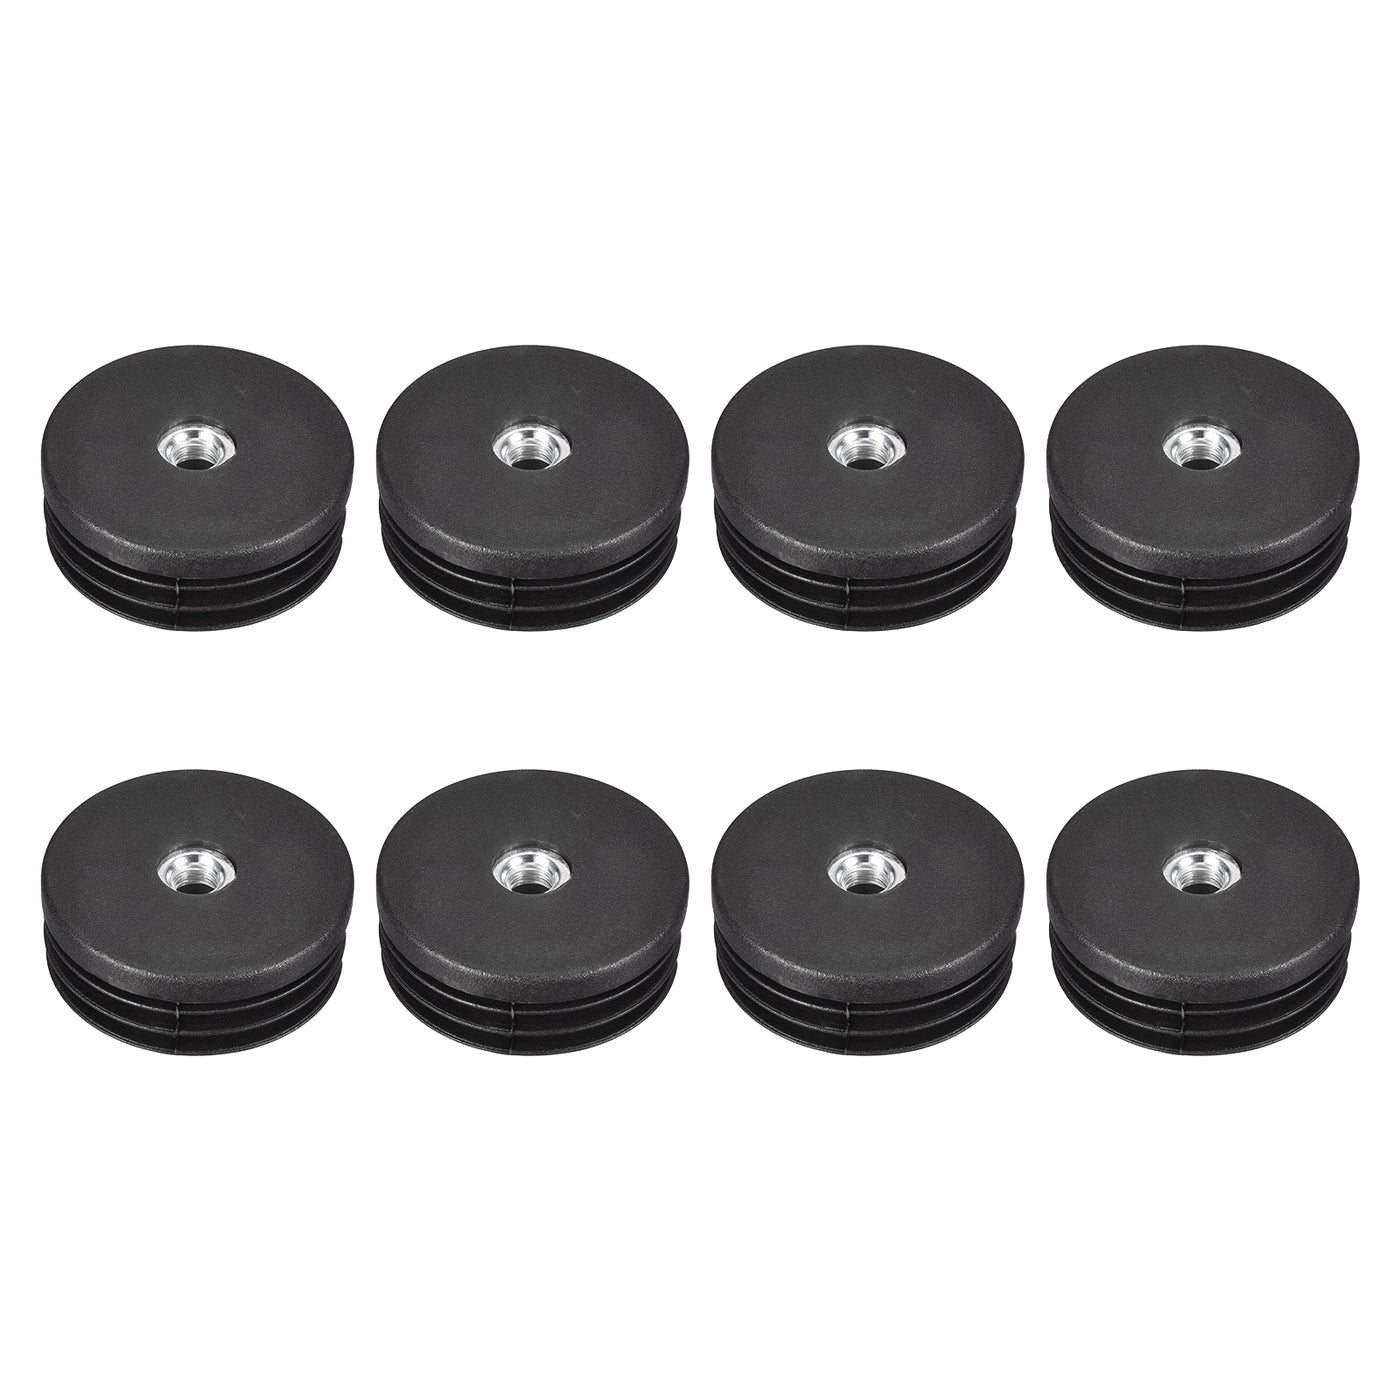 uxcell Uxcell 8Pcs 50mm/1.97" Caster Insert with Thread, Round M8 Thread for Furniture